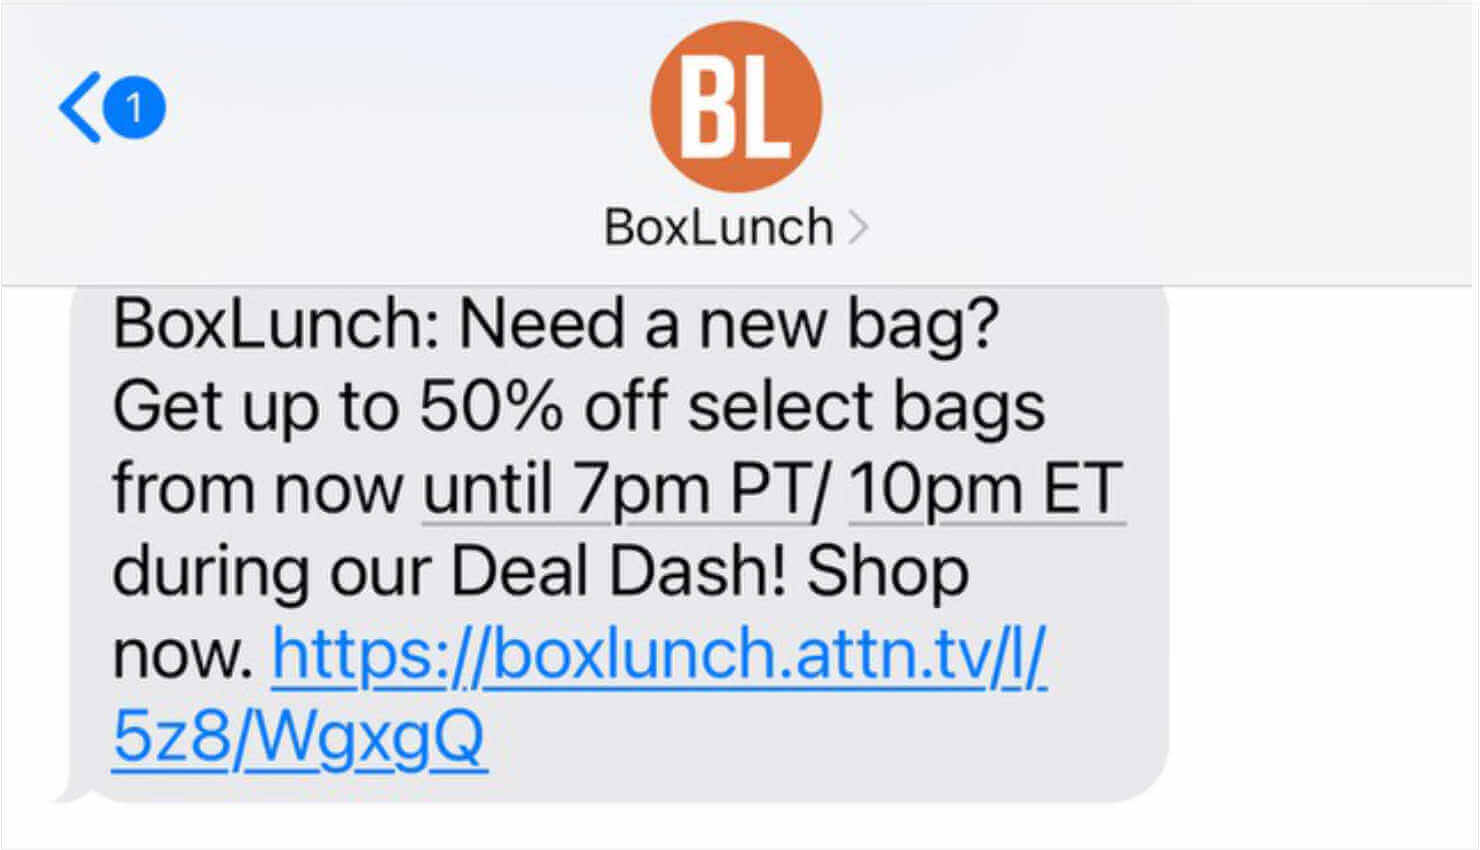 Text message from BoxLunch that says: "BoxLunch: Need a new bag? Get up to 50% off select bags from now until 7pm PT/10pm ET during our Deal Dash! Shop now." Then there's a link